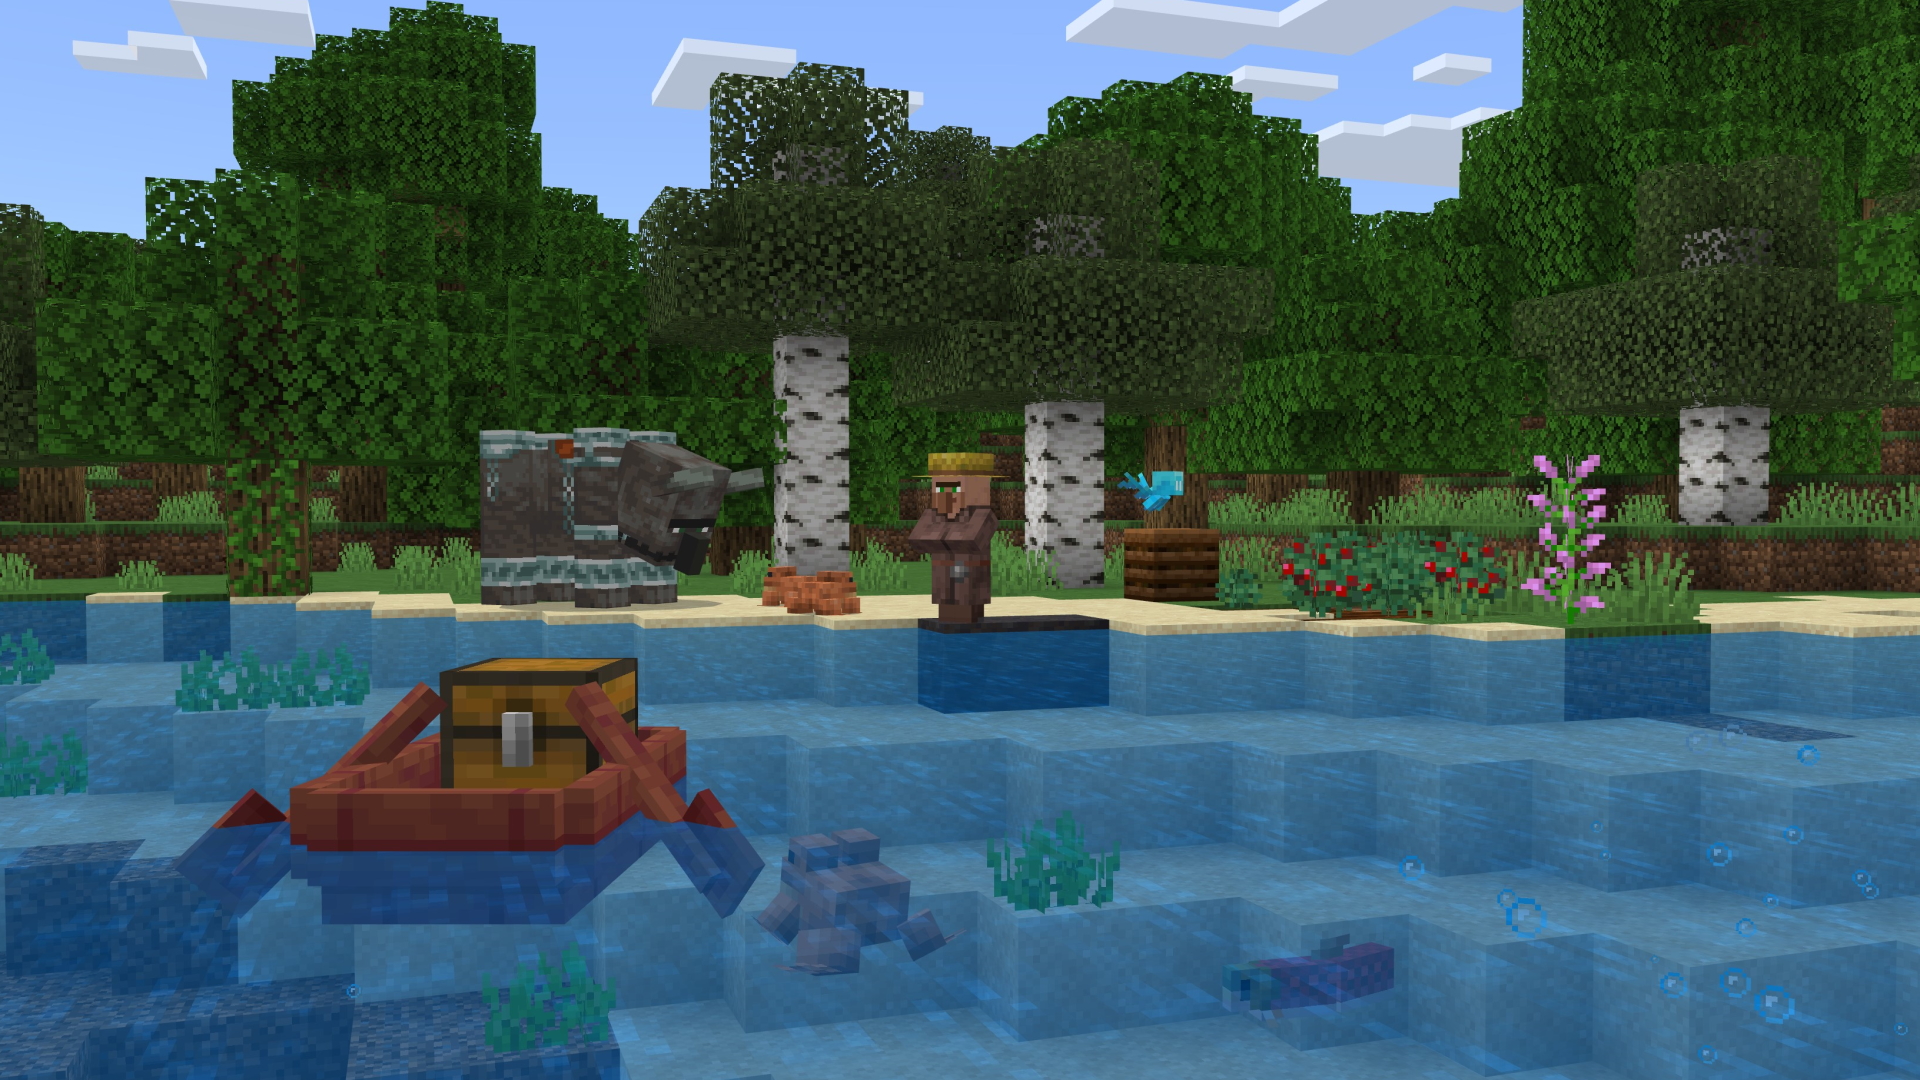 A Minecraft screenshot featuring a chest boat, a ravager, a villager, and some allays